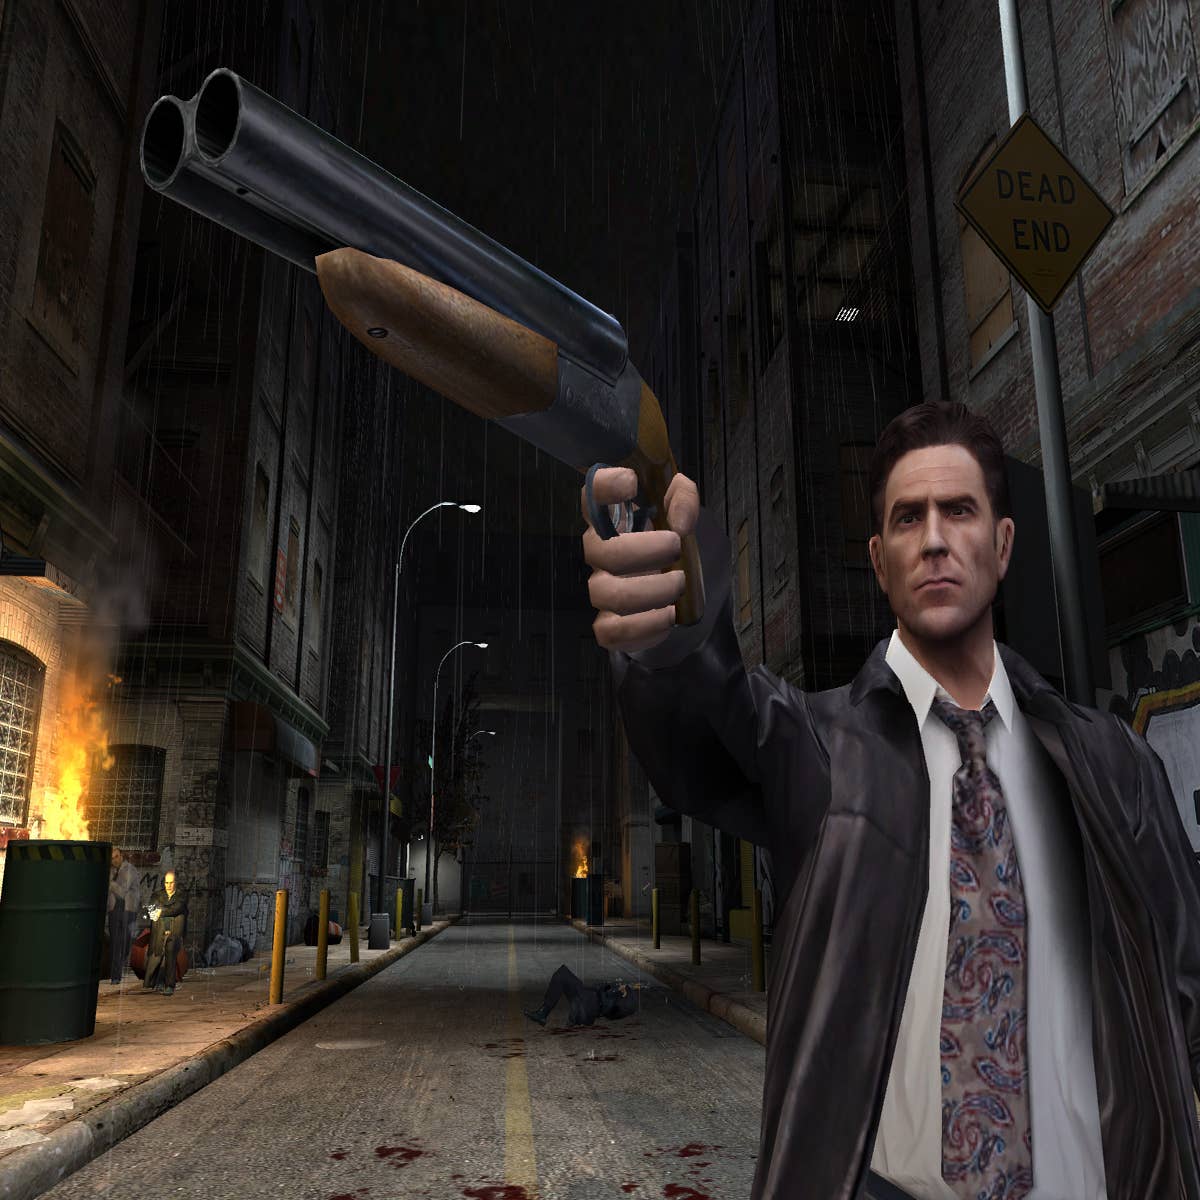 The List: Max Payne 2 – The Fall of Max Payne (Part 1)